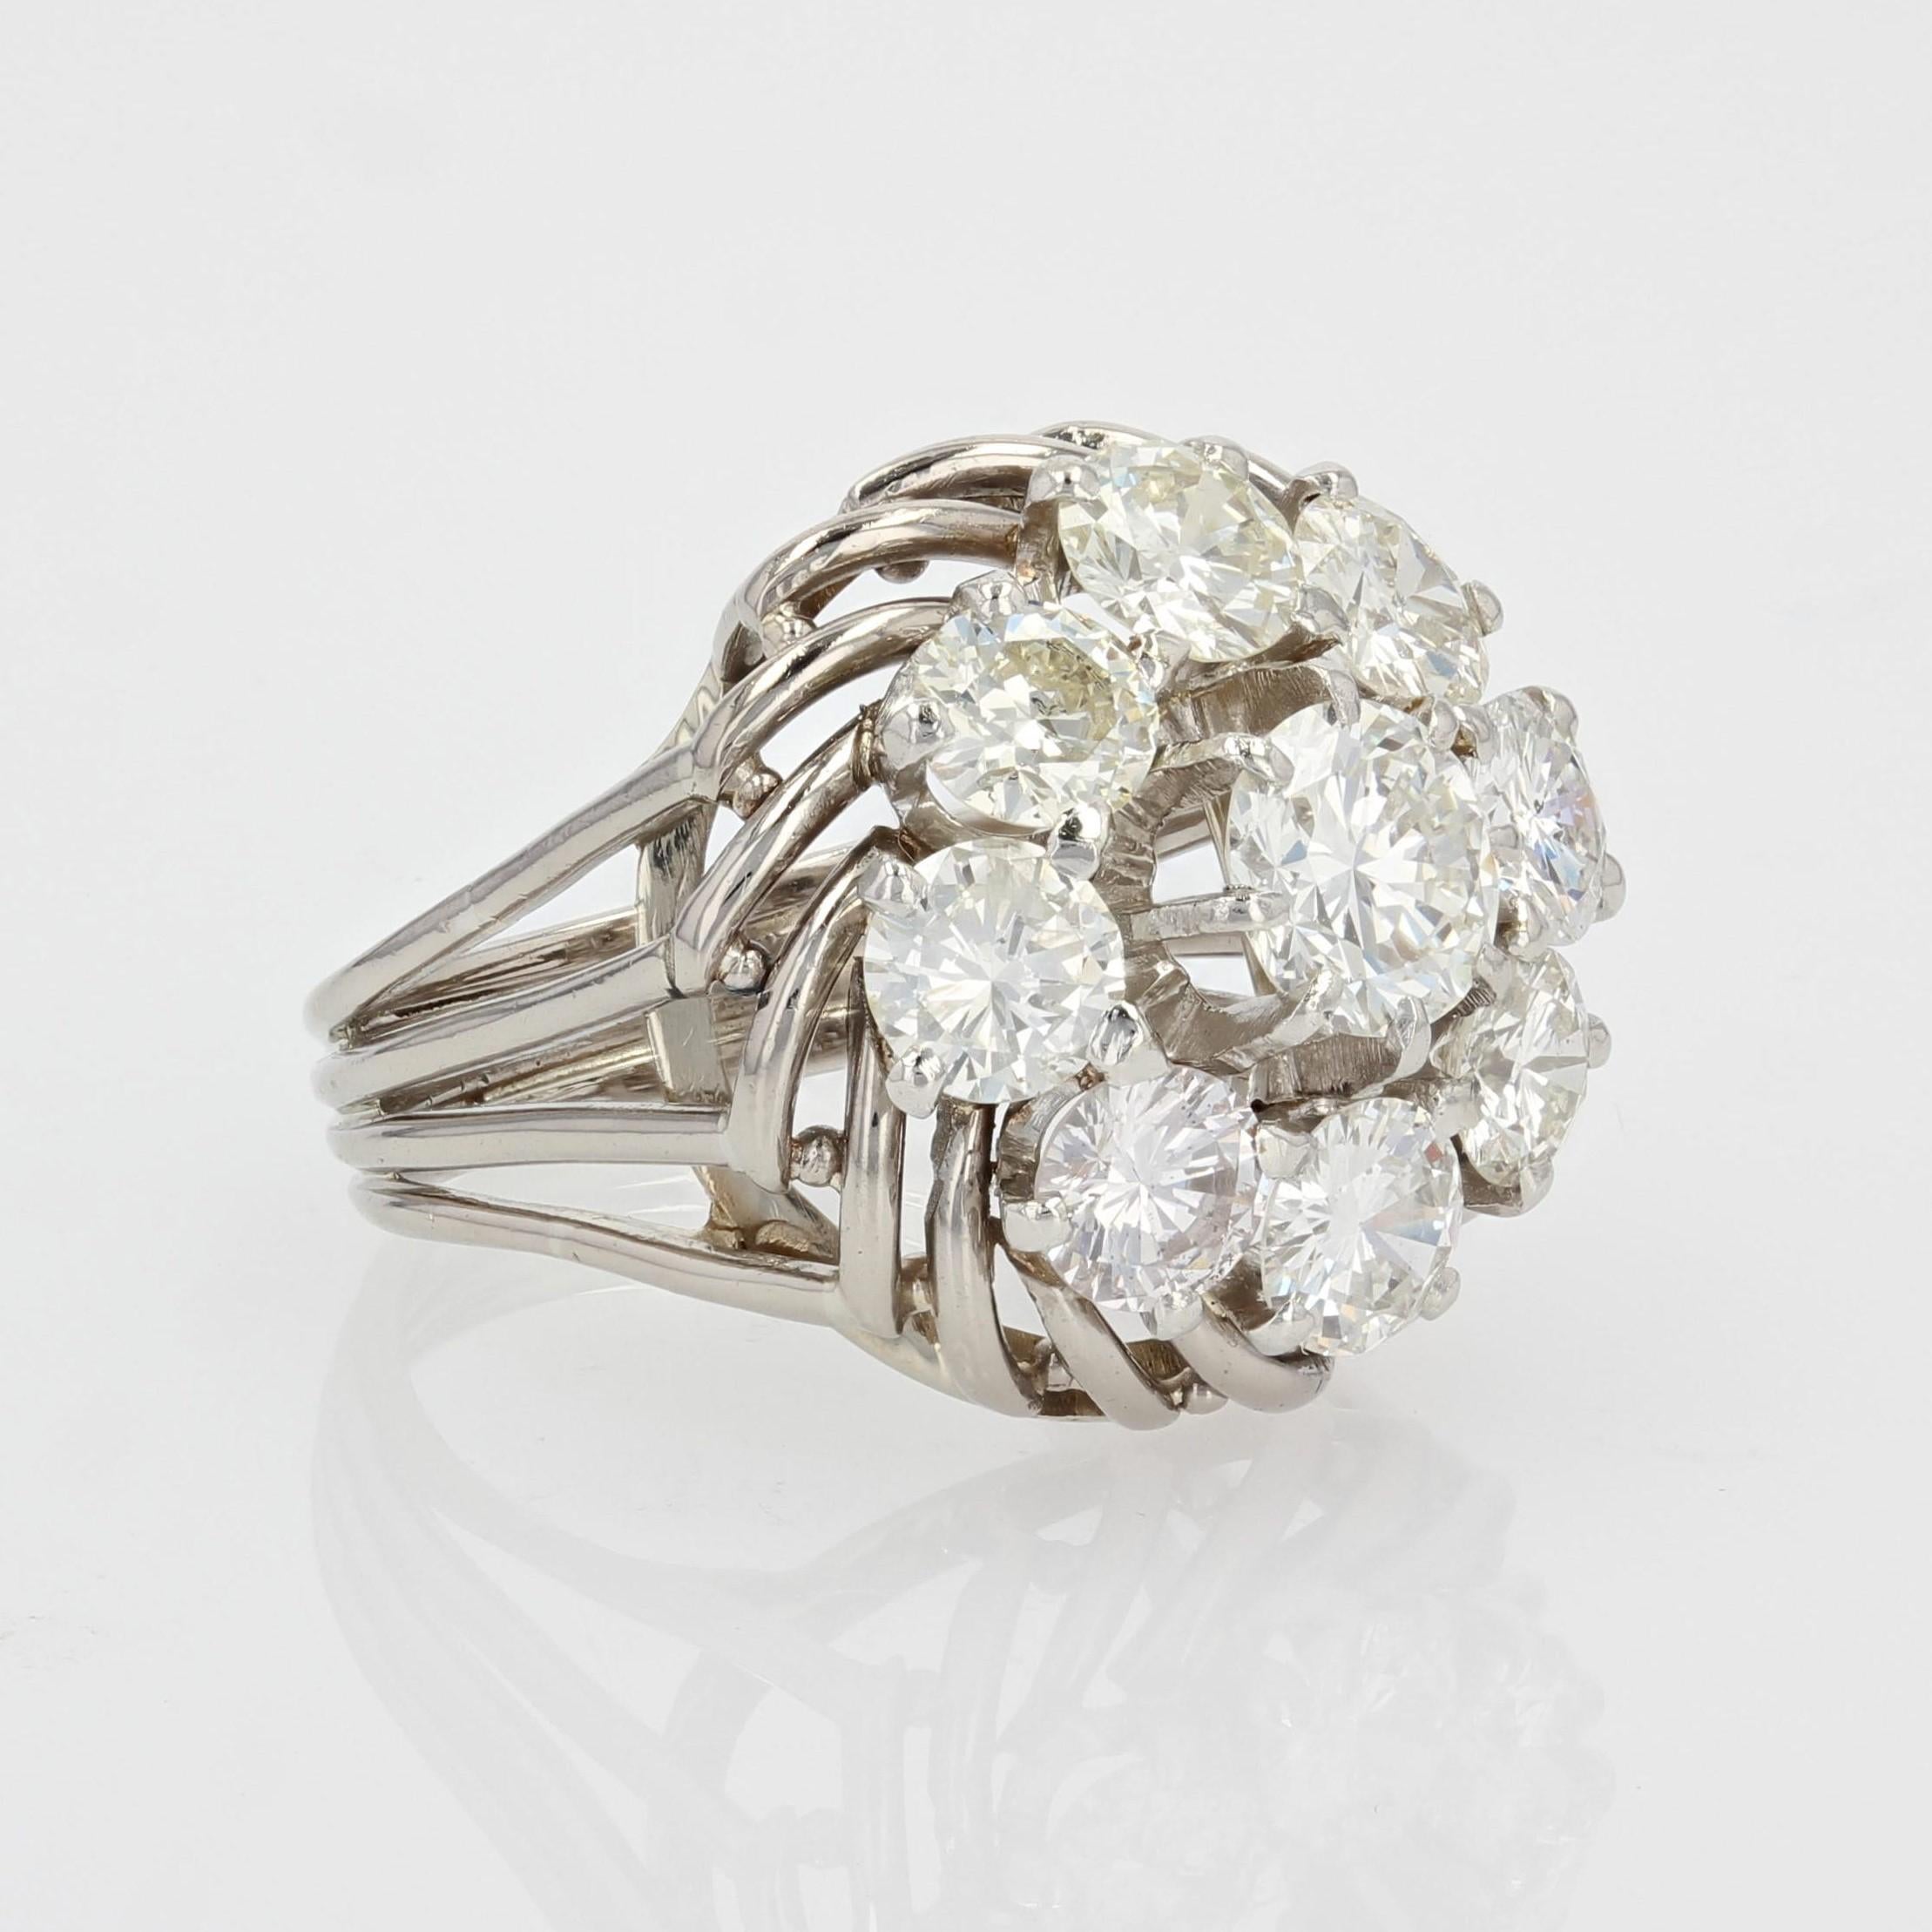 French, 1950s Diamonds 18 Karat White Gold Platinum Wire Daisy Ring For Sale 4